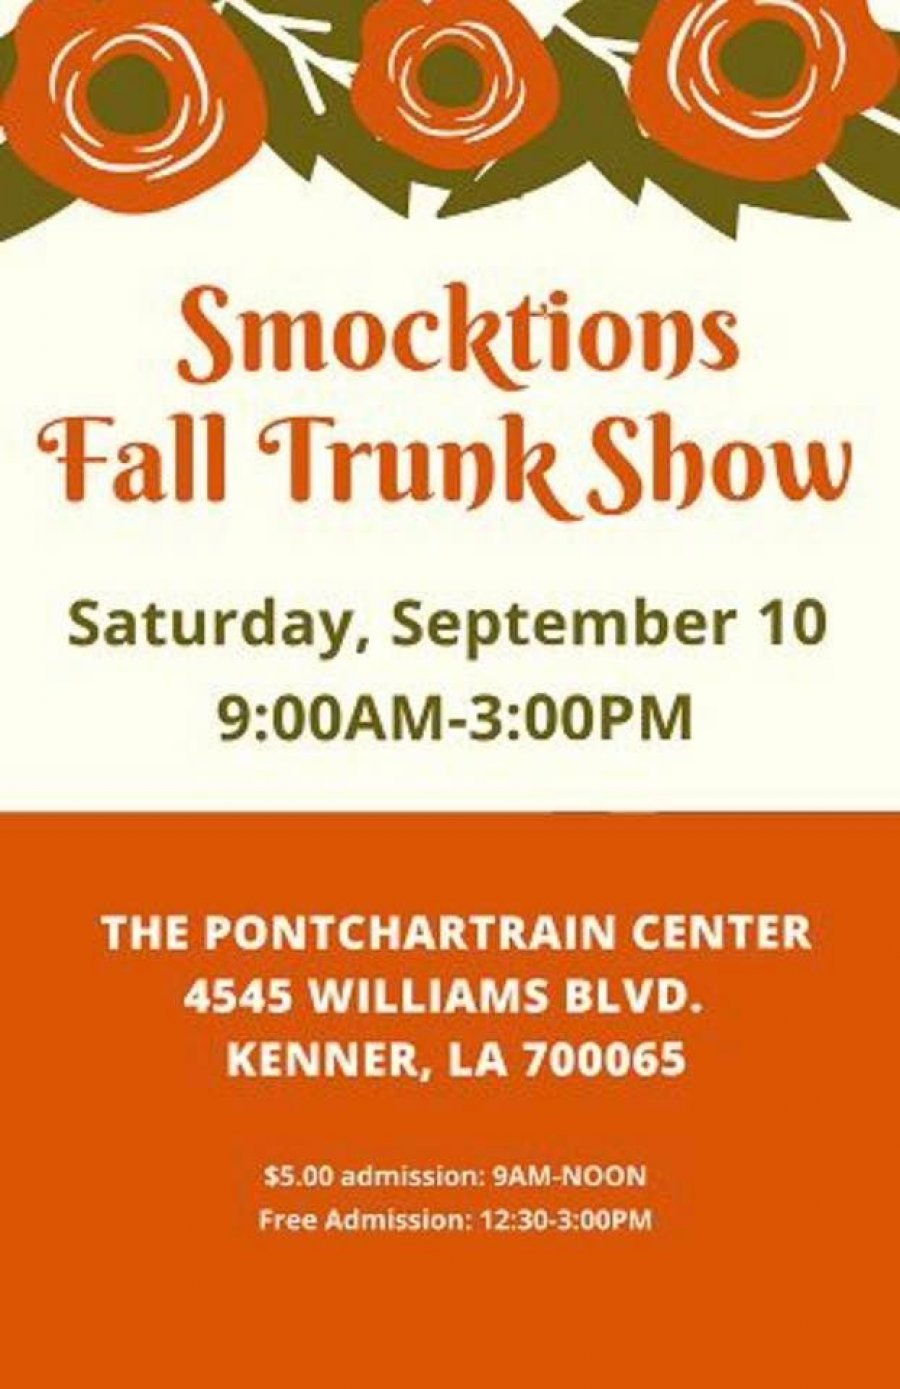 SMOCKTIONS Fall Trunk Show and Sample Sale